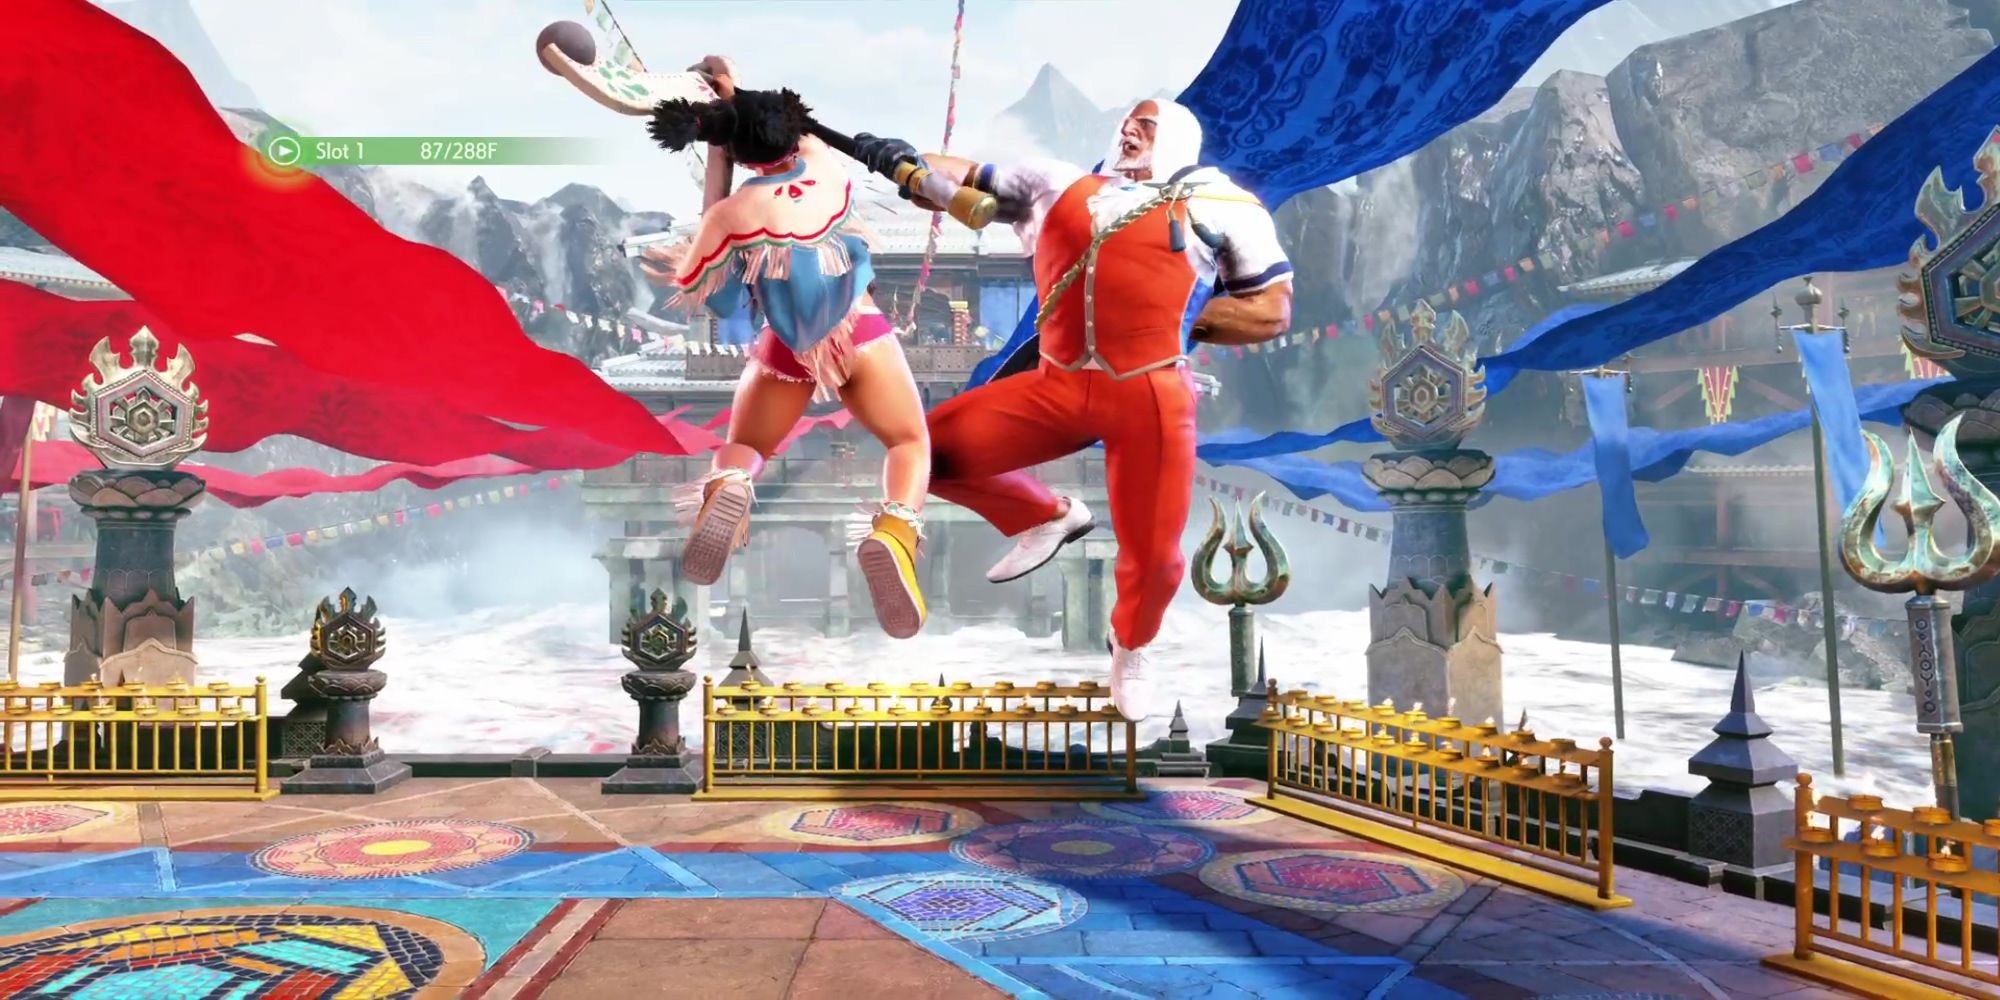 JP catches Lily with his staff during a battle at Suval'hal Arena in Street Fighter 6.